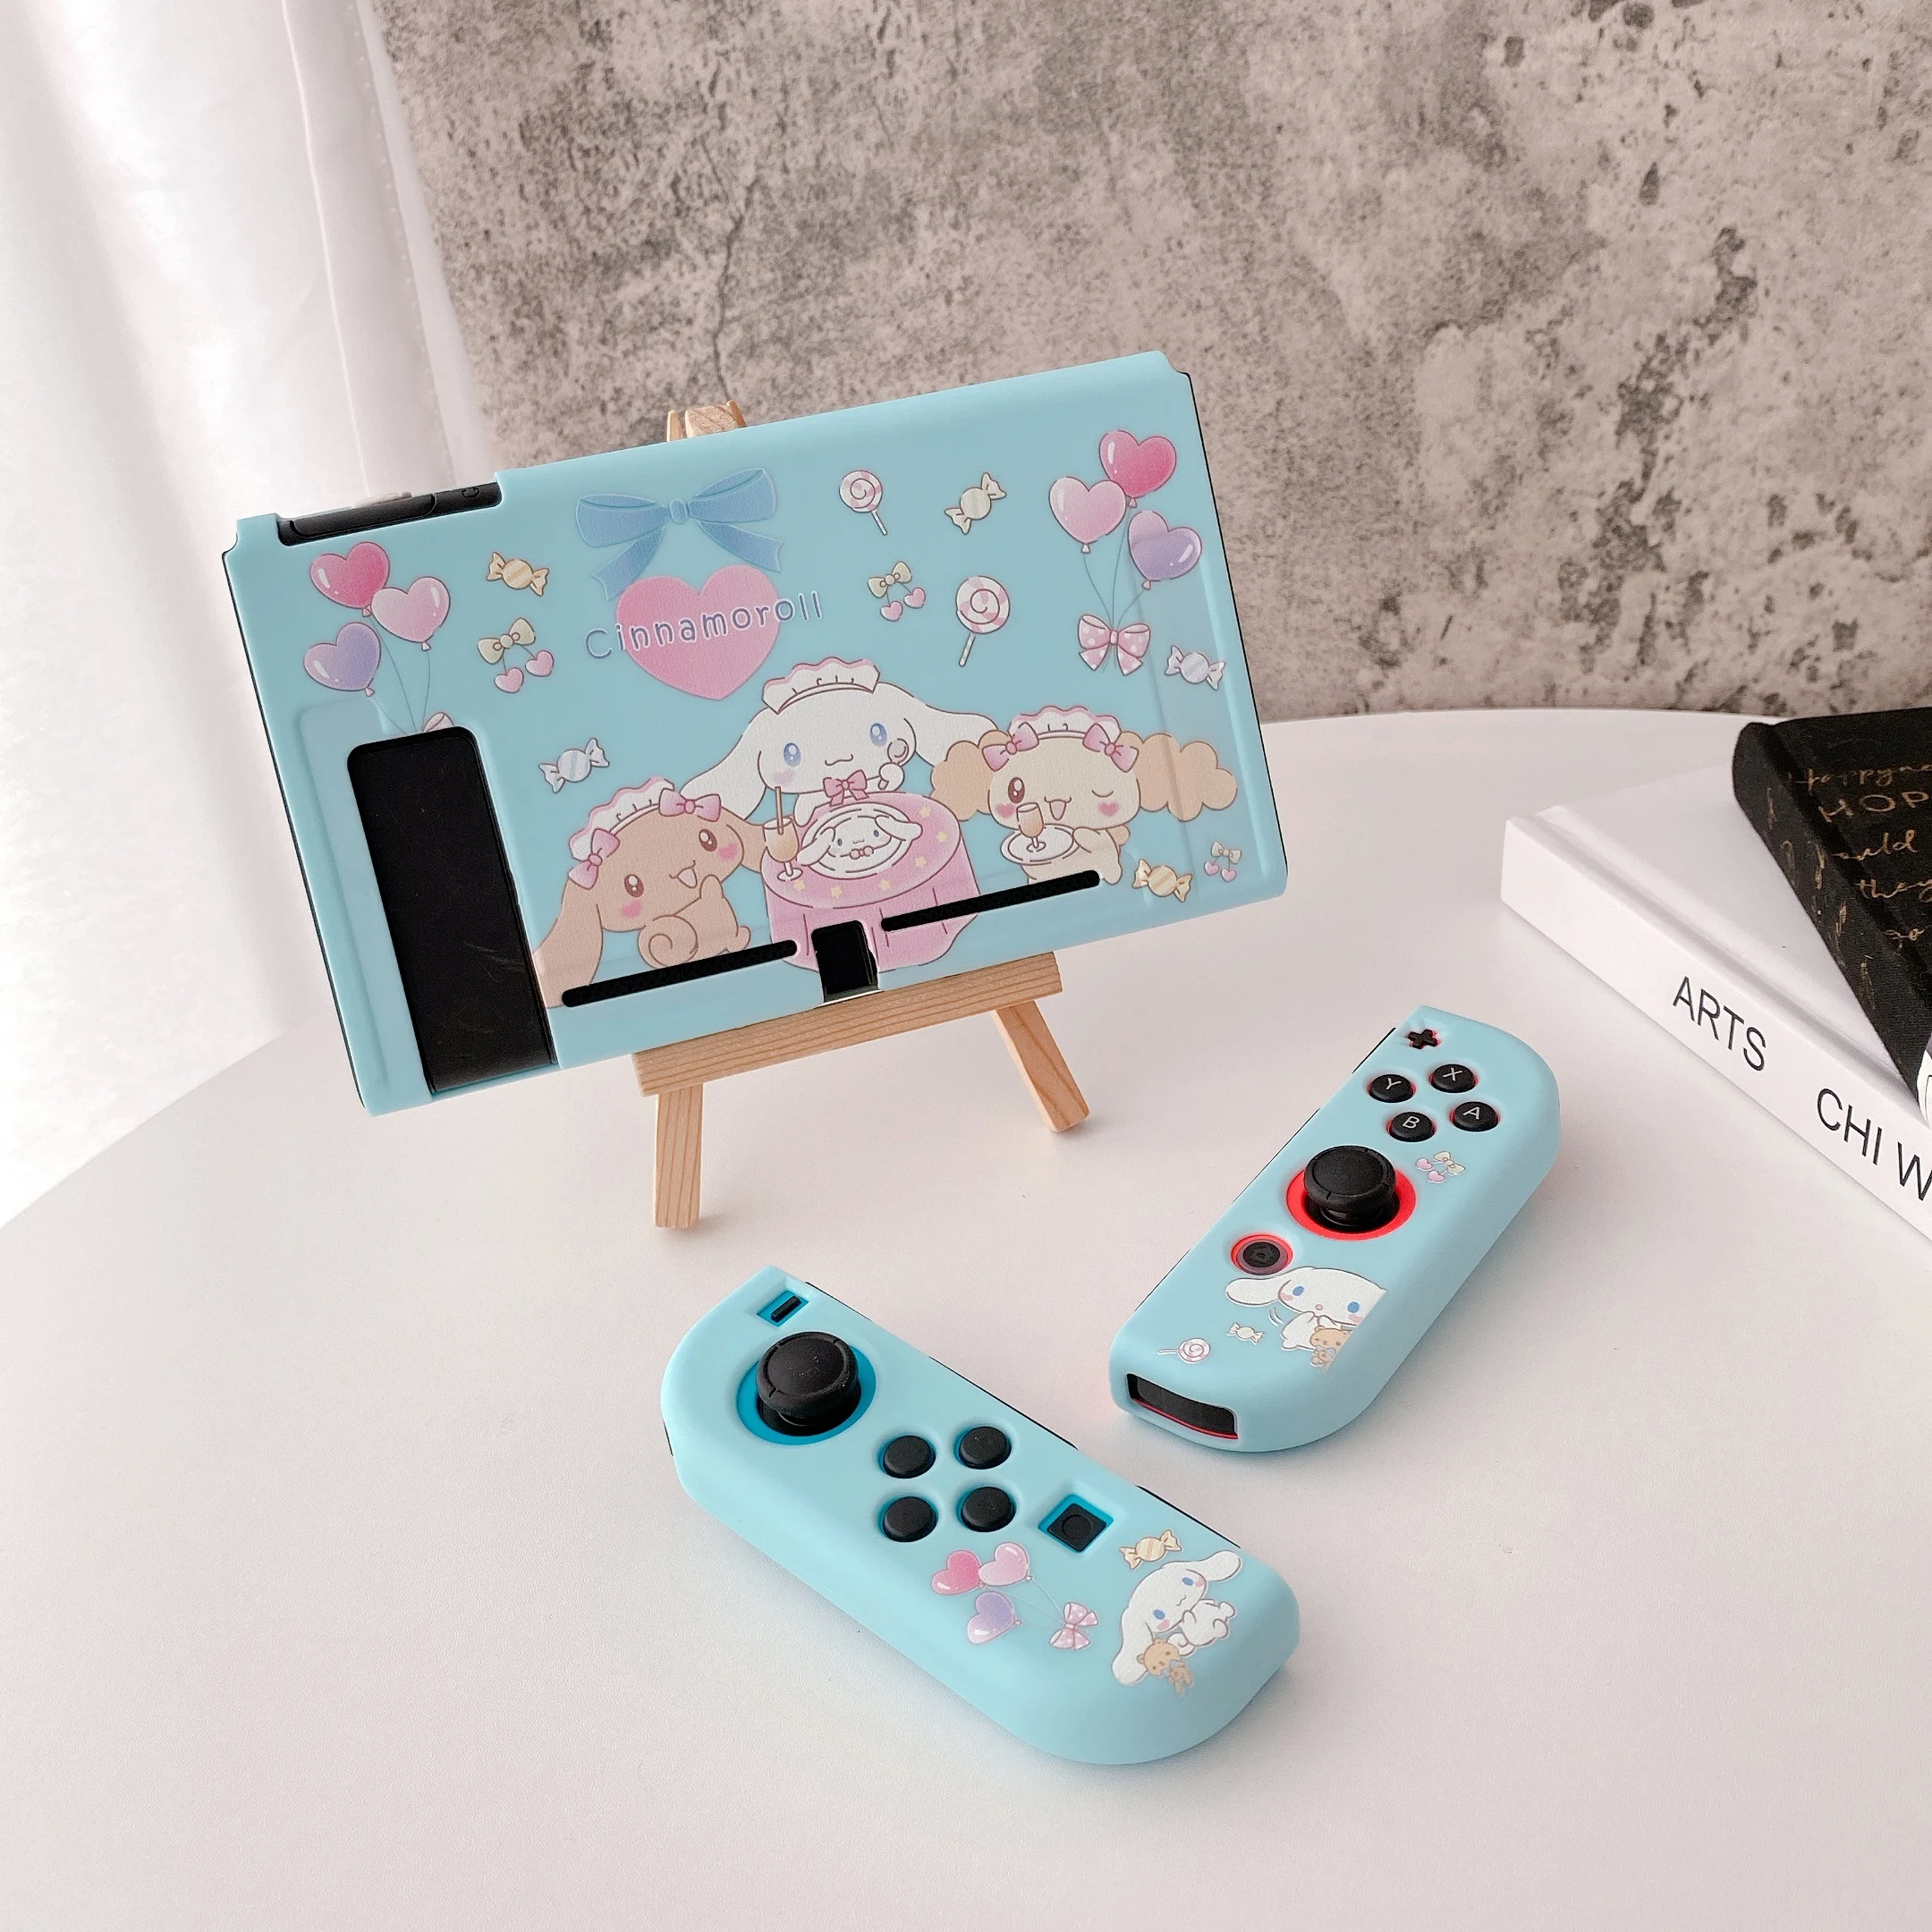 

Sanrio Cinnamoroll Blue Gudetama XO Soft Phone Cases For Nintendo Switch Game Console Controller OLED Gaming Accessories